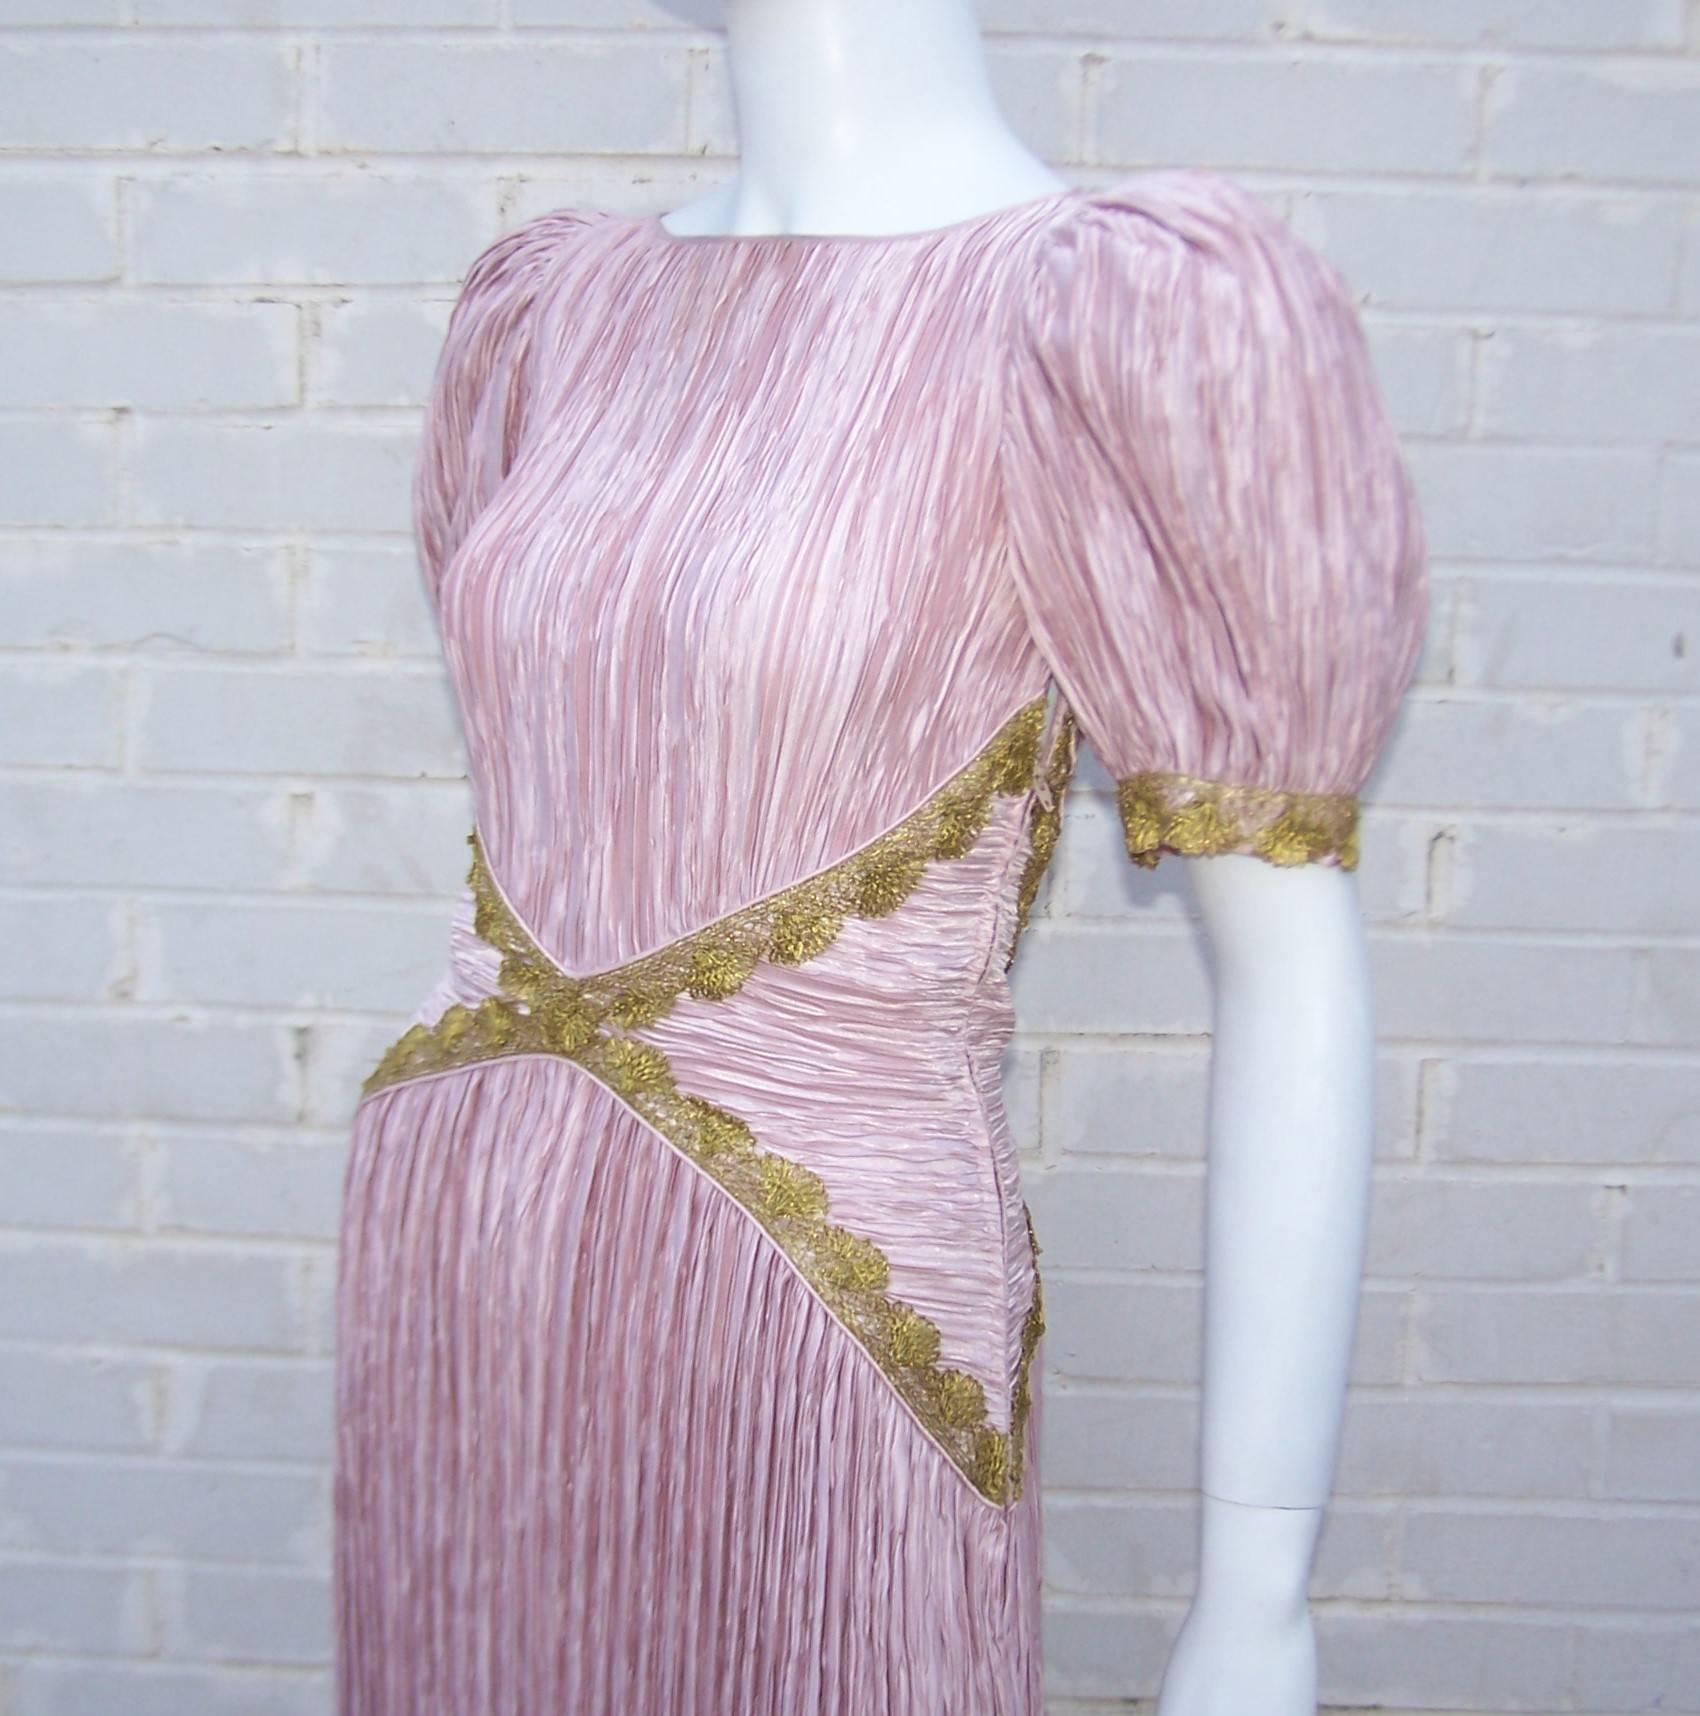 Heavenly 1980's Mary McFadden Pink Goddess Dress With Gold Braid 1